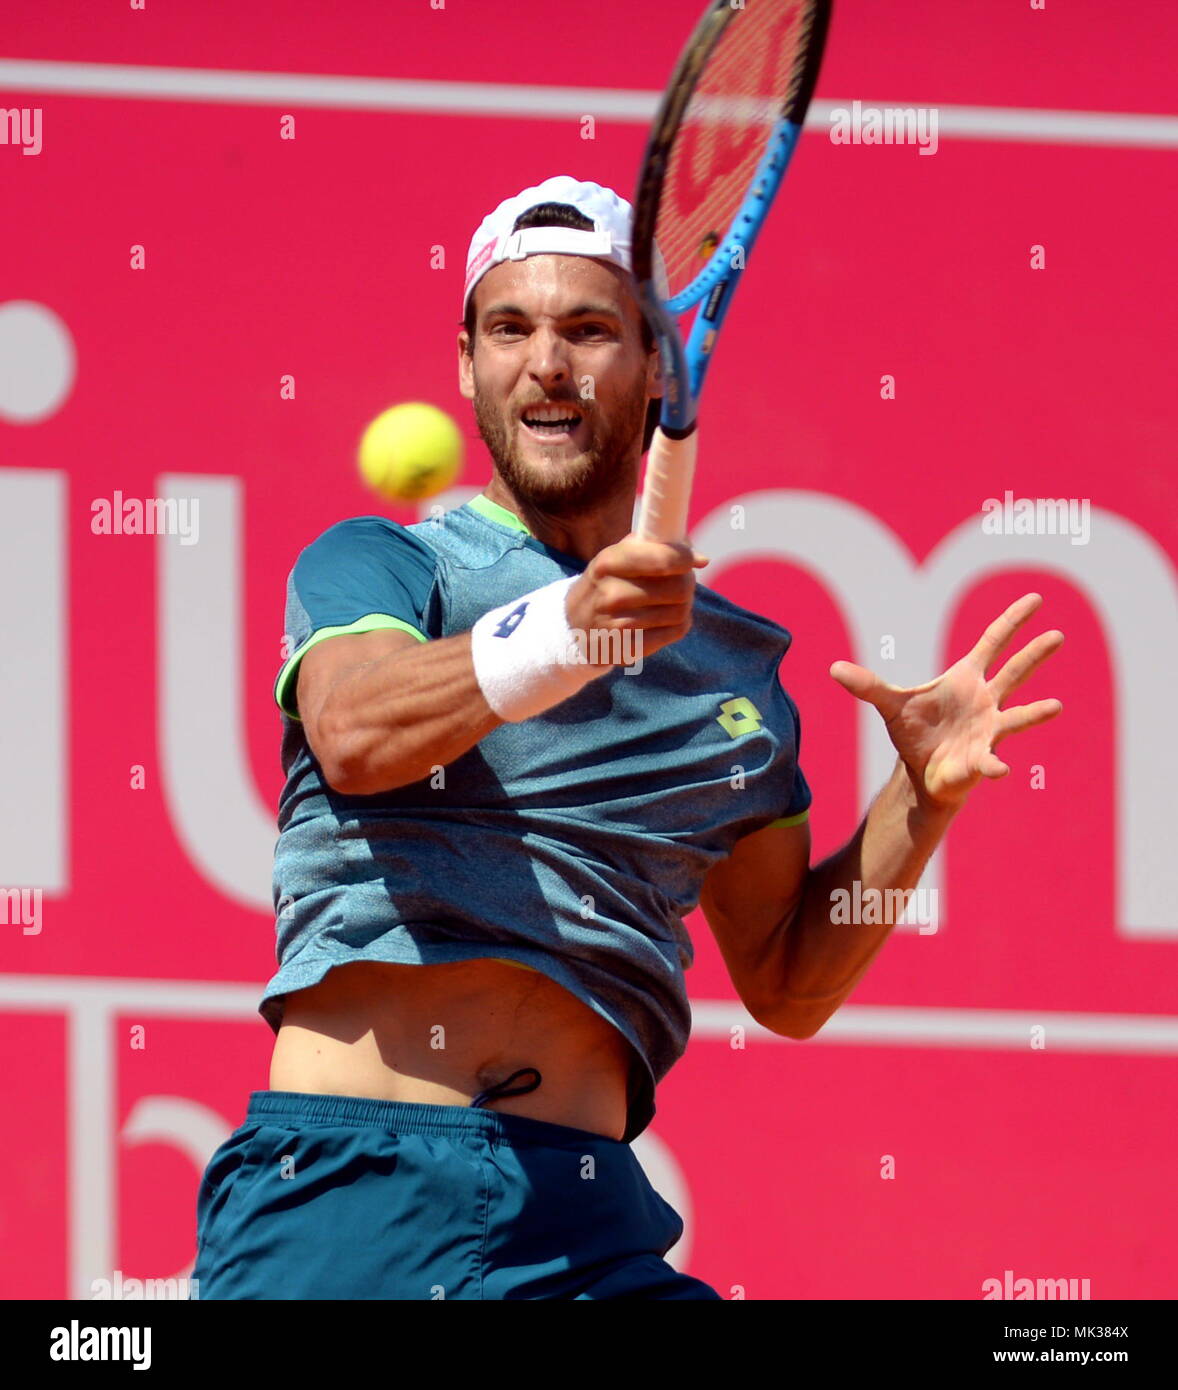 Cascais, Portugal. 6th May, 2018. Portugal's Joao Sousa hits a return  during the men's singles final match against Frances Tiafoe of the United  States at the Estoril Tennis Open in Cascais, Portugal,